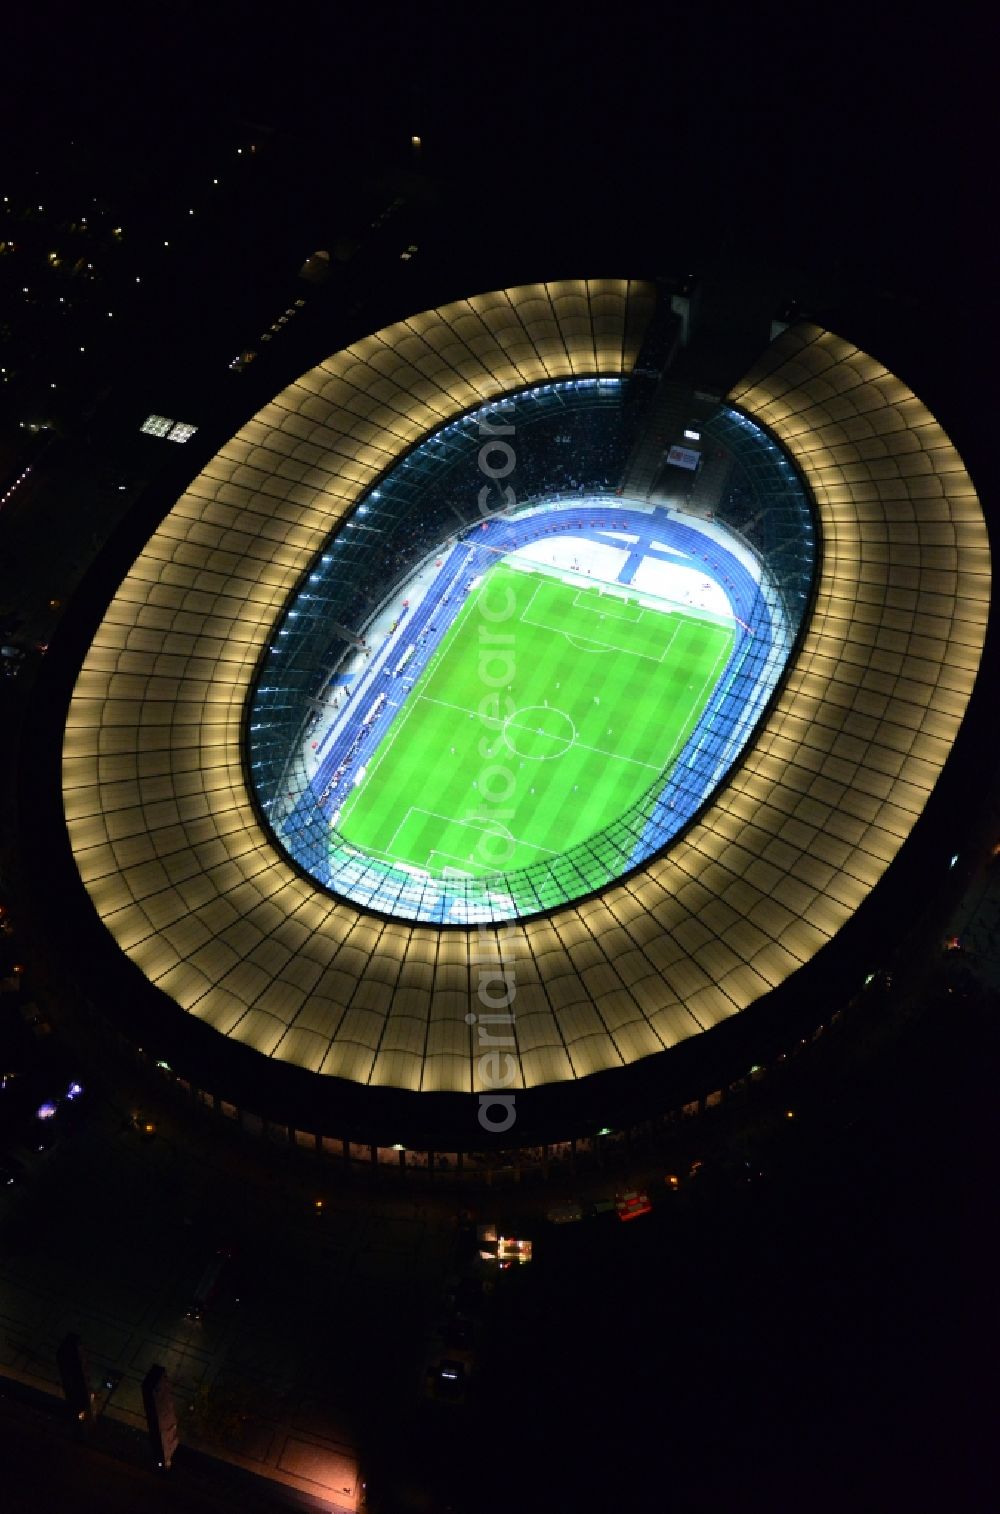 Berlin at night from the bird perspective: Night lighting Sports facility grounds of the Arena stadium Olympiastadion of Hertha BSC in Berlin in Germany